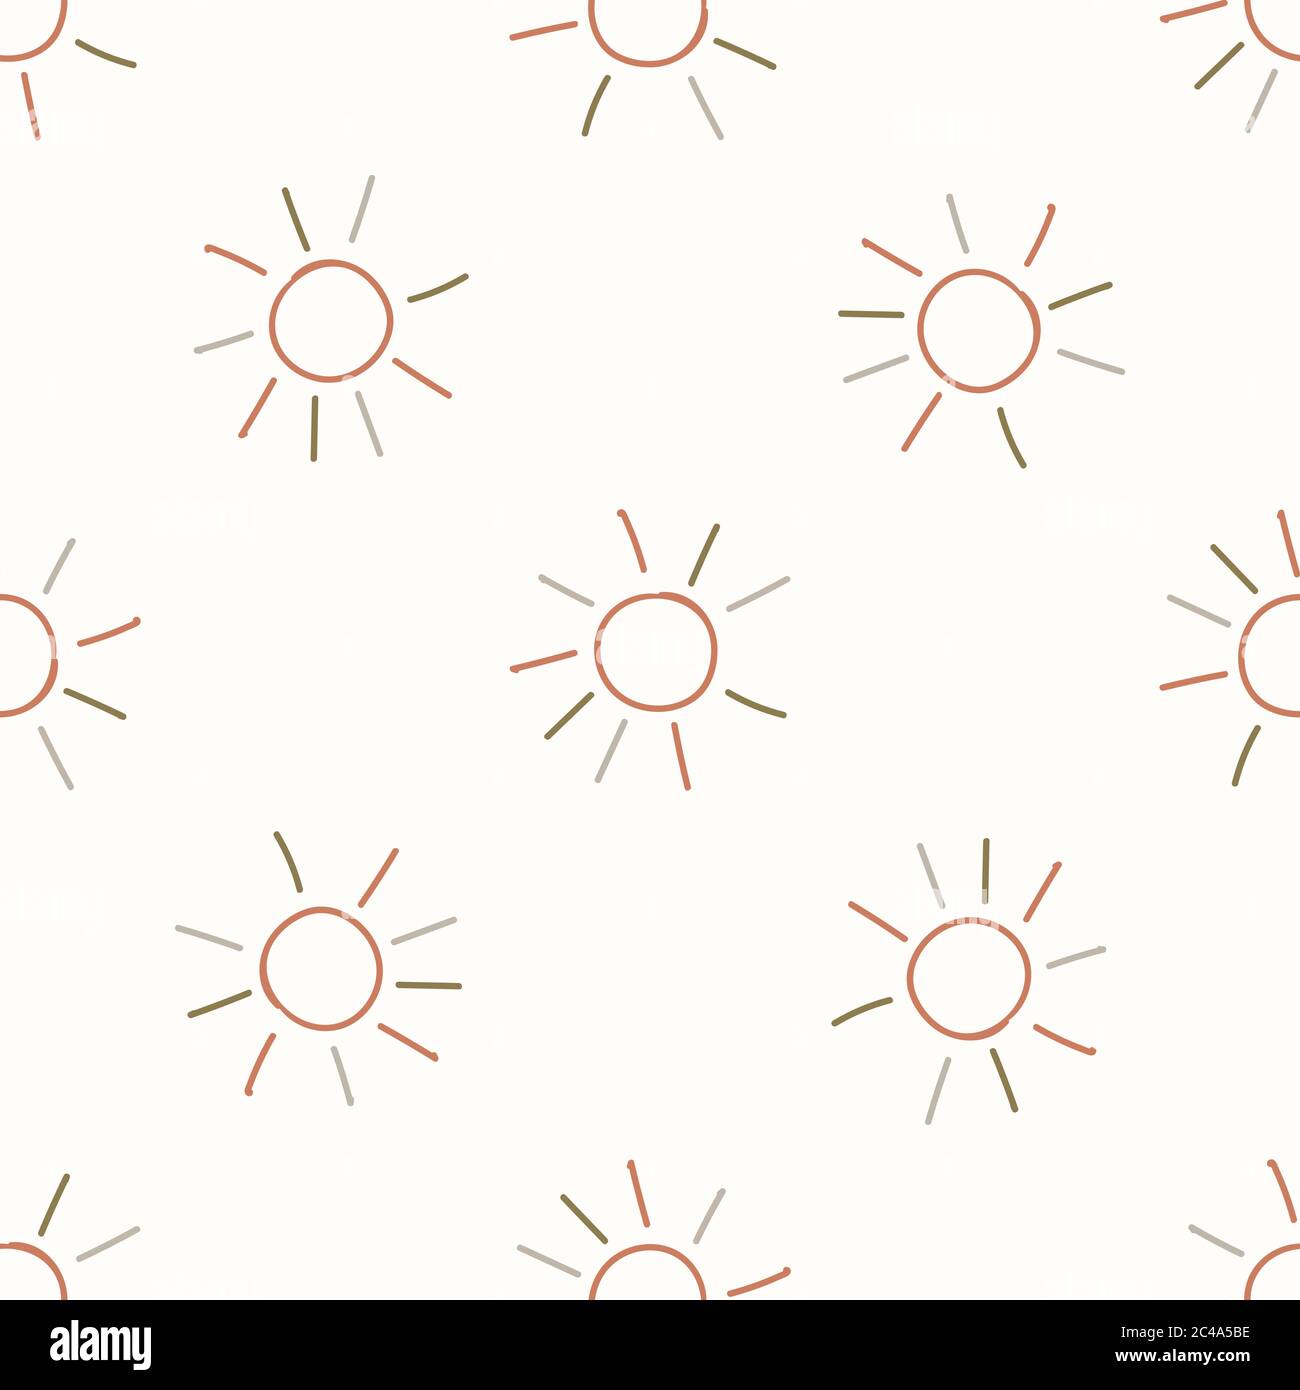 Gender Neutral Nursery Fabric Wallpaper and Home Decor  Spoonflower